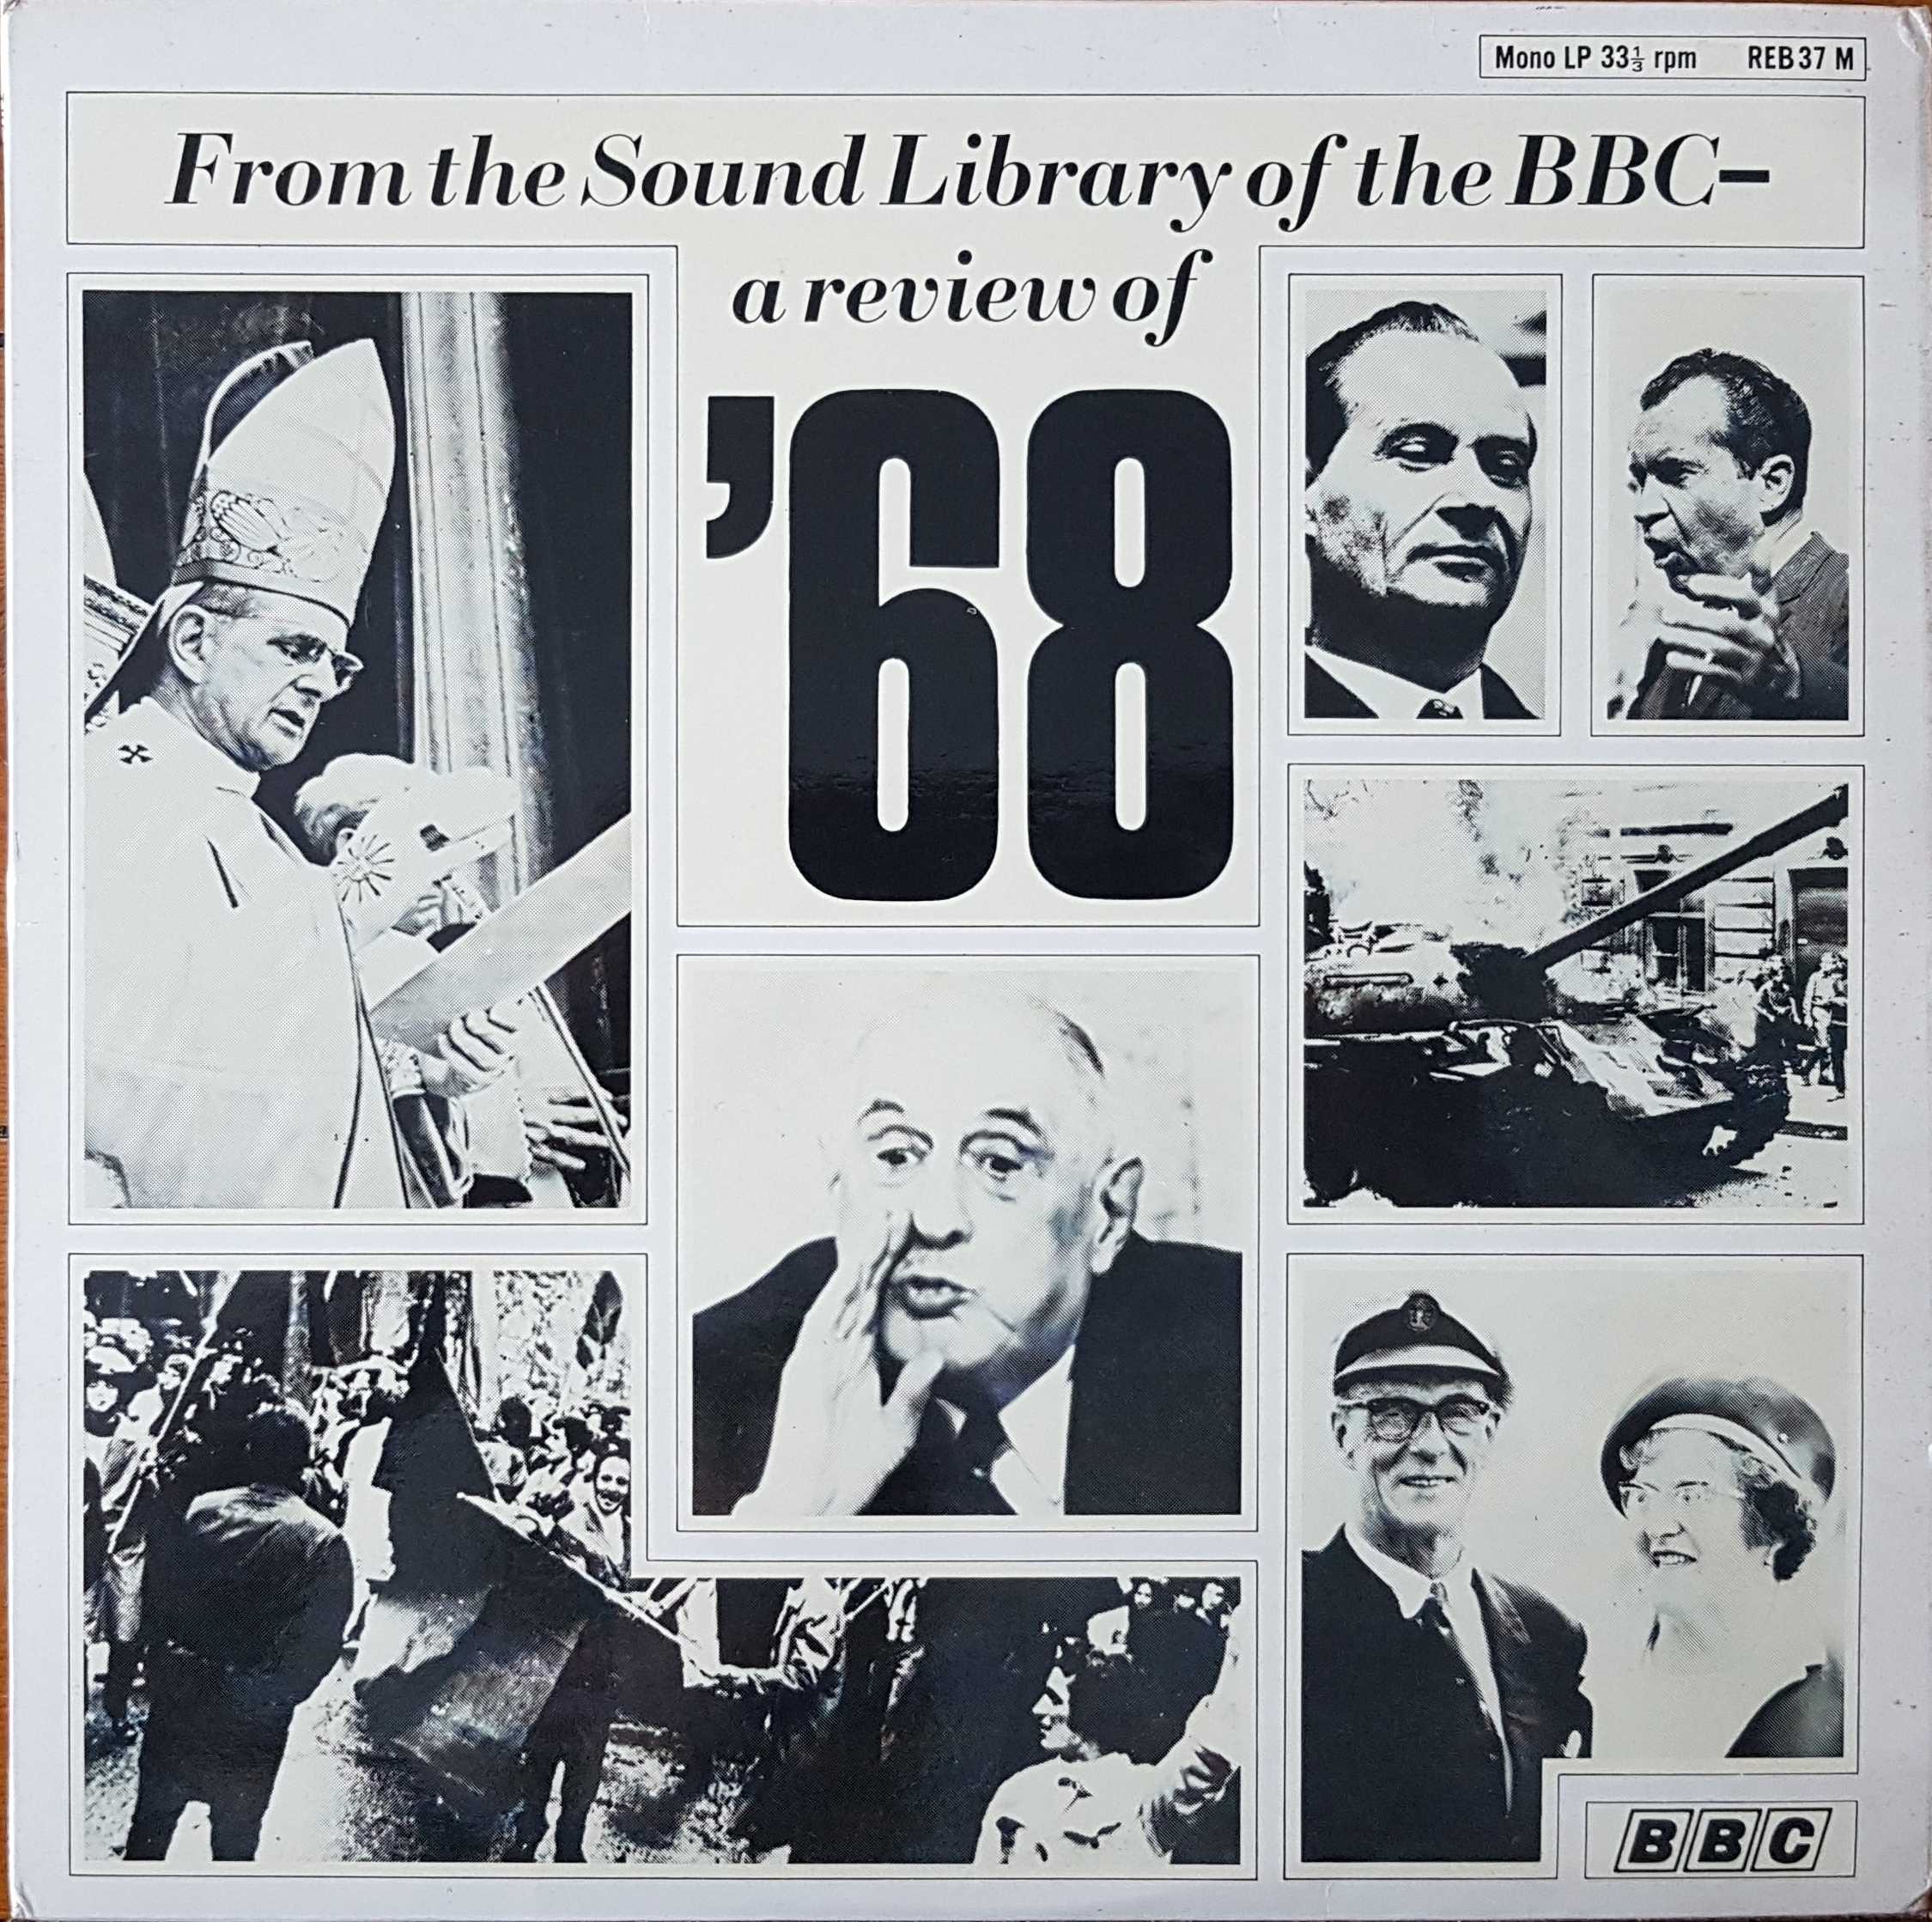 Picture of REB 37 The BBC review of '68 by artist Various from the BBC albums - Records and Tapes library